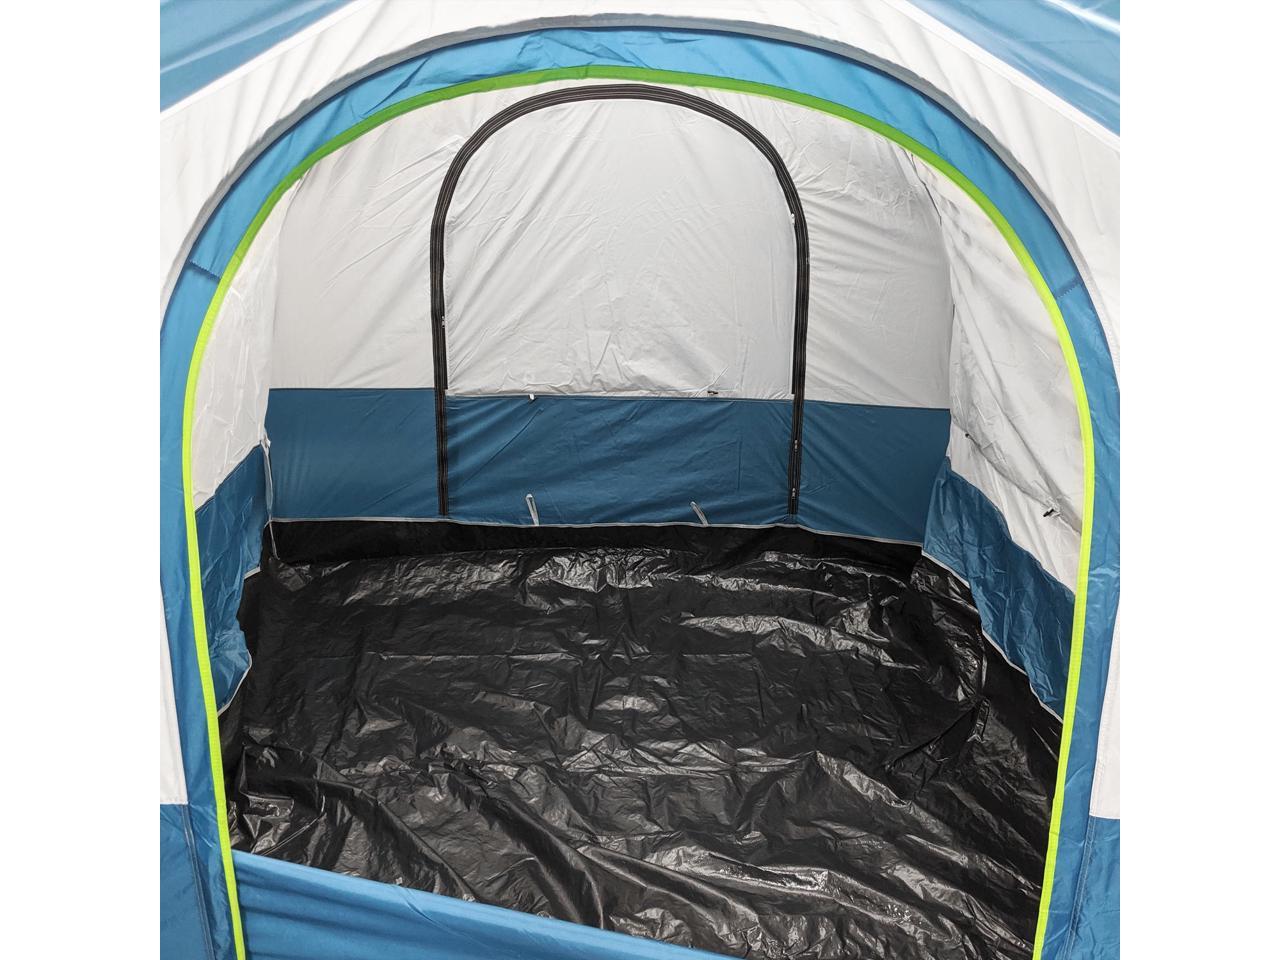 Storage Bag 8'x8' Gray/Blue Rainfly SUV Camping Tent Up to 8-Person Capacity